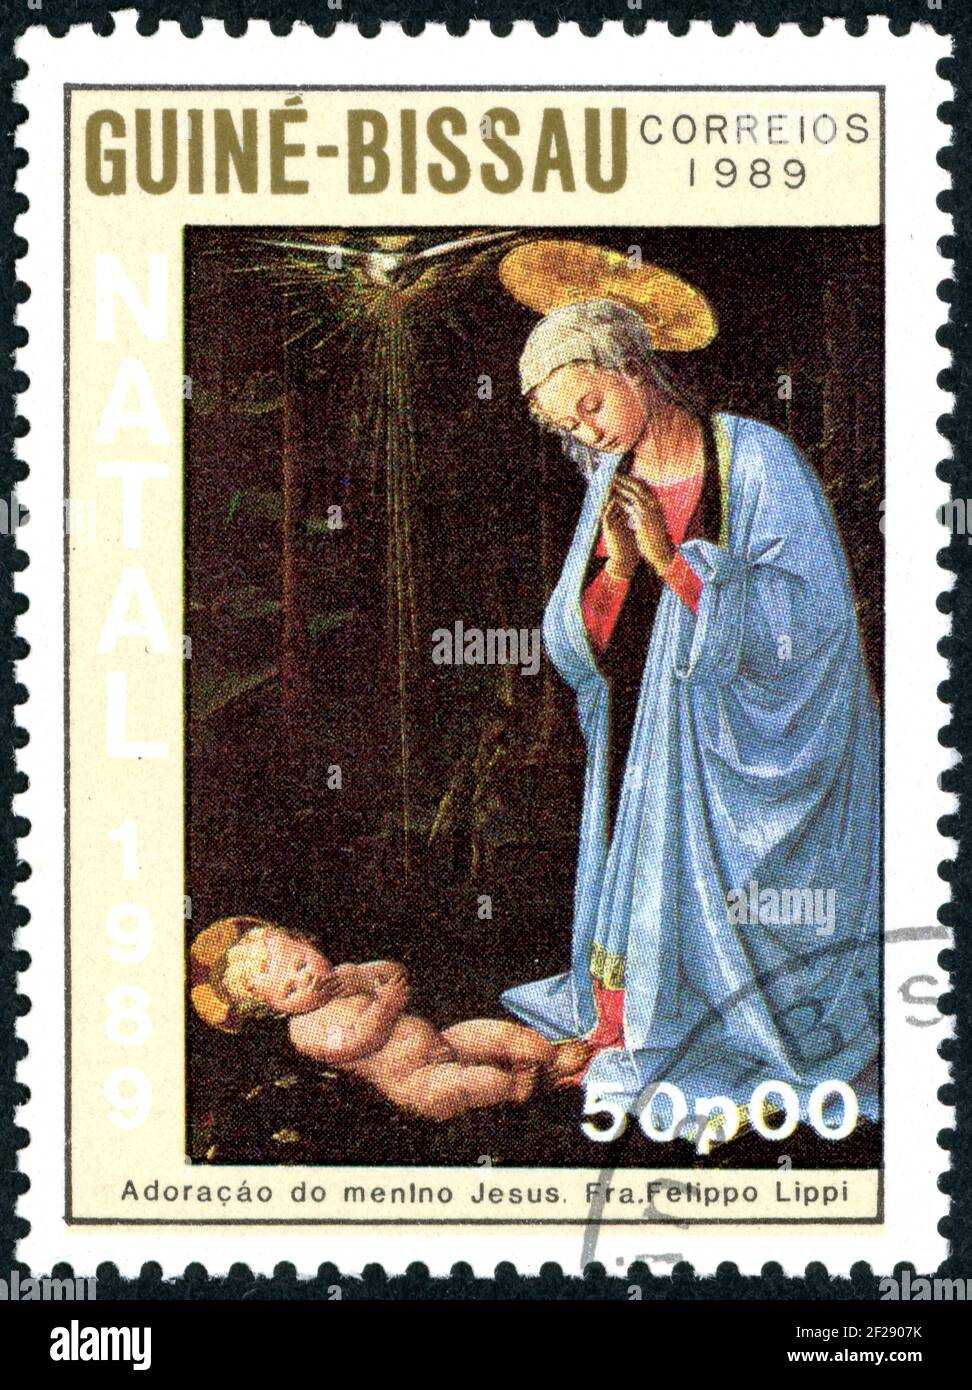 A stamp printed in Guinea-Bissau, shown the painting by Fra Filippo Lippi - Madonna and Child and the Adoration of the Magi, circa 1989 Stock Photo